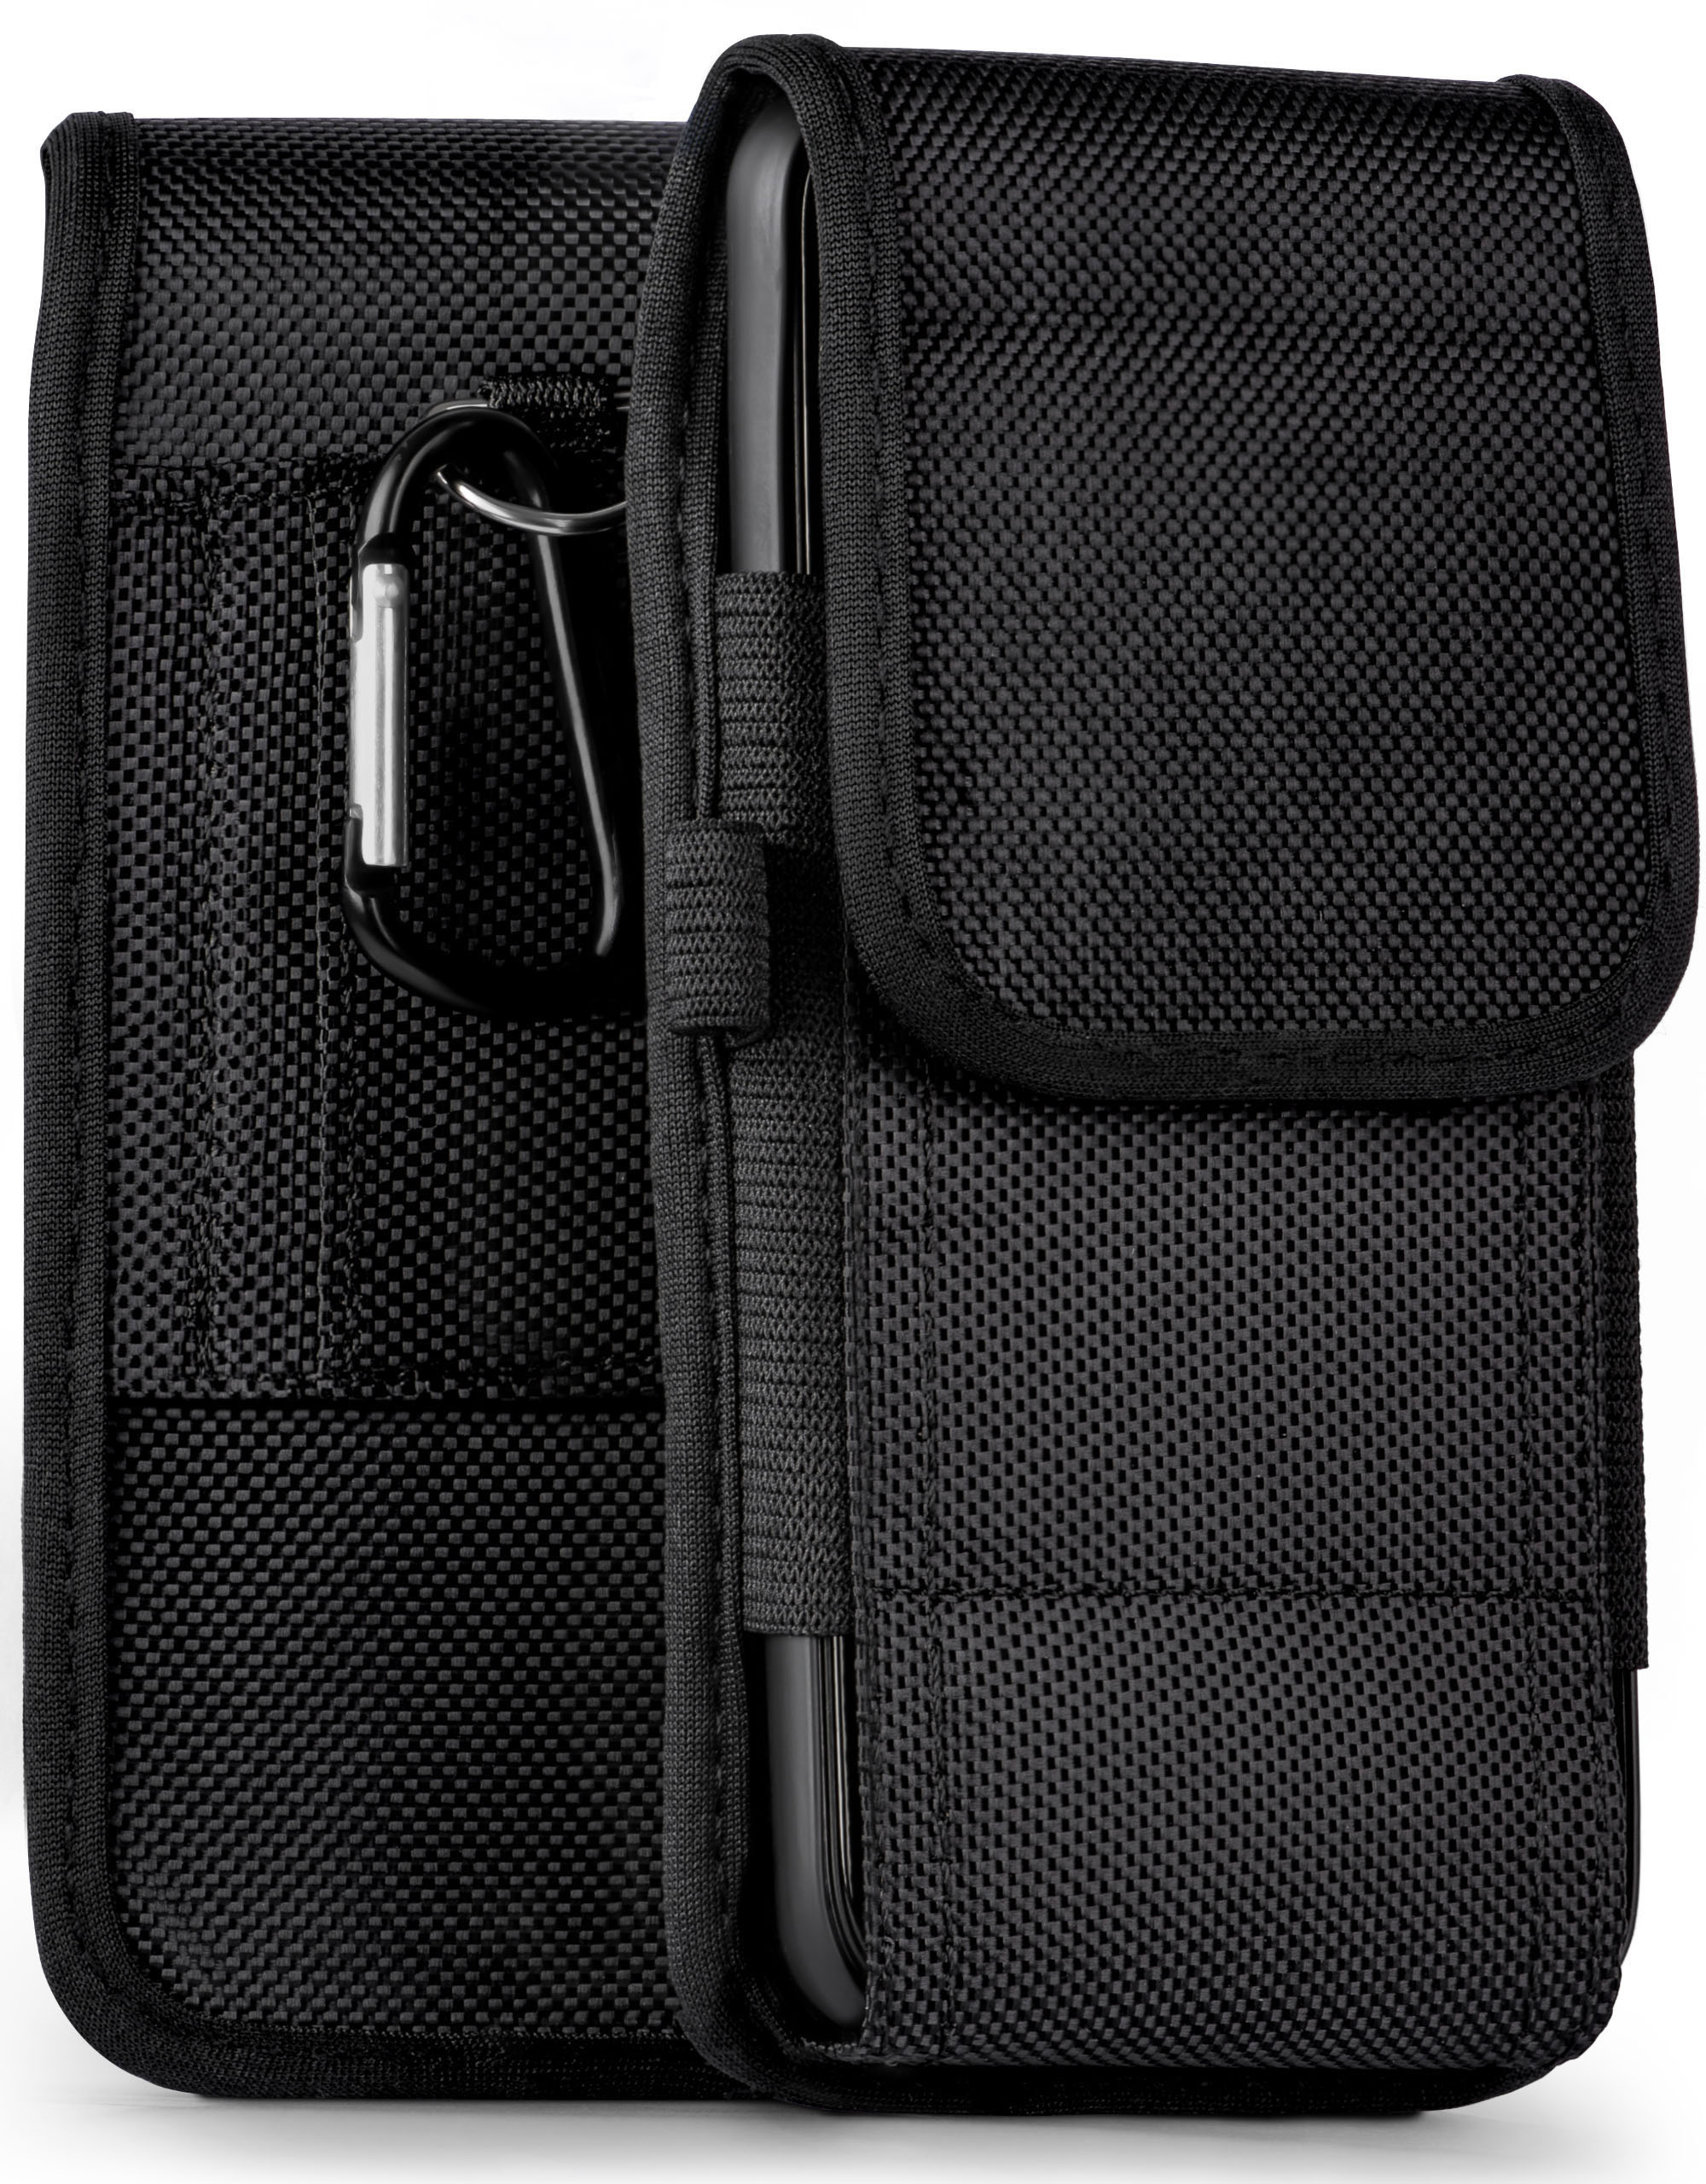 7P, Agility Note Note Trail 7 Holster, Case, MOEX ULEFONE, /